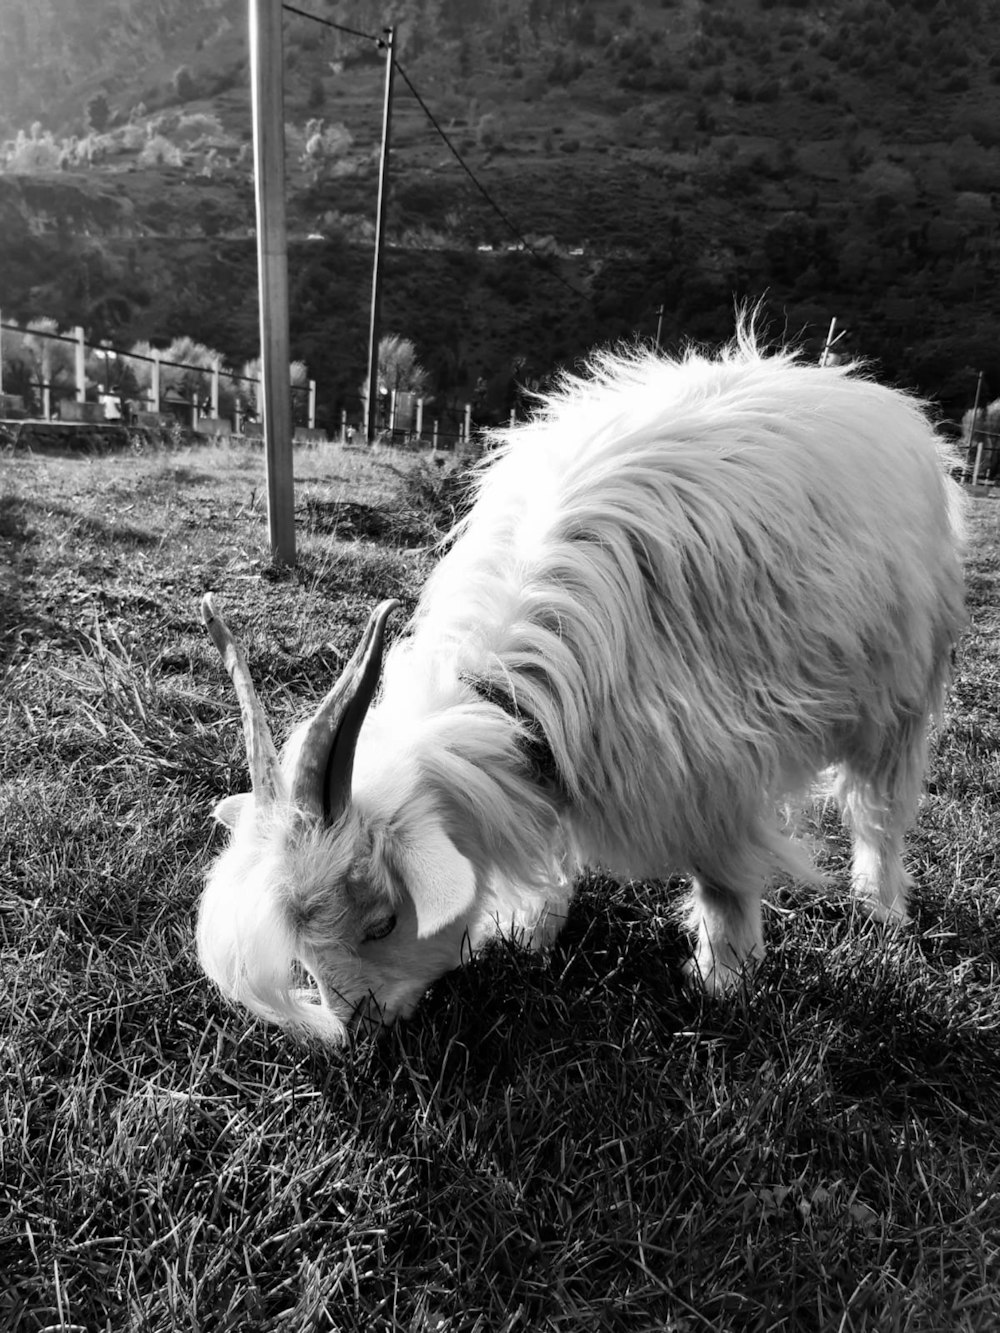 a goat grazing on grass in a fenced in area